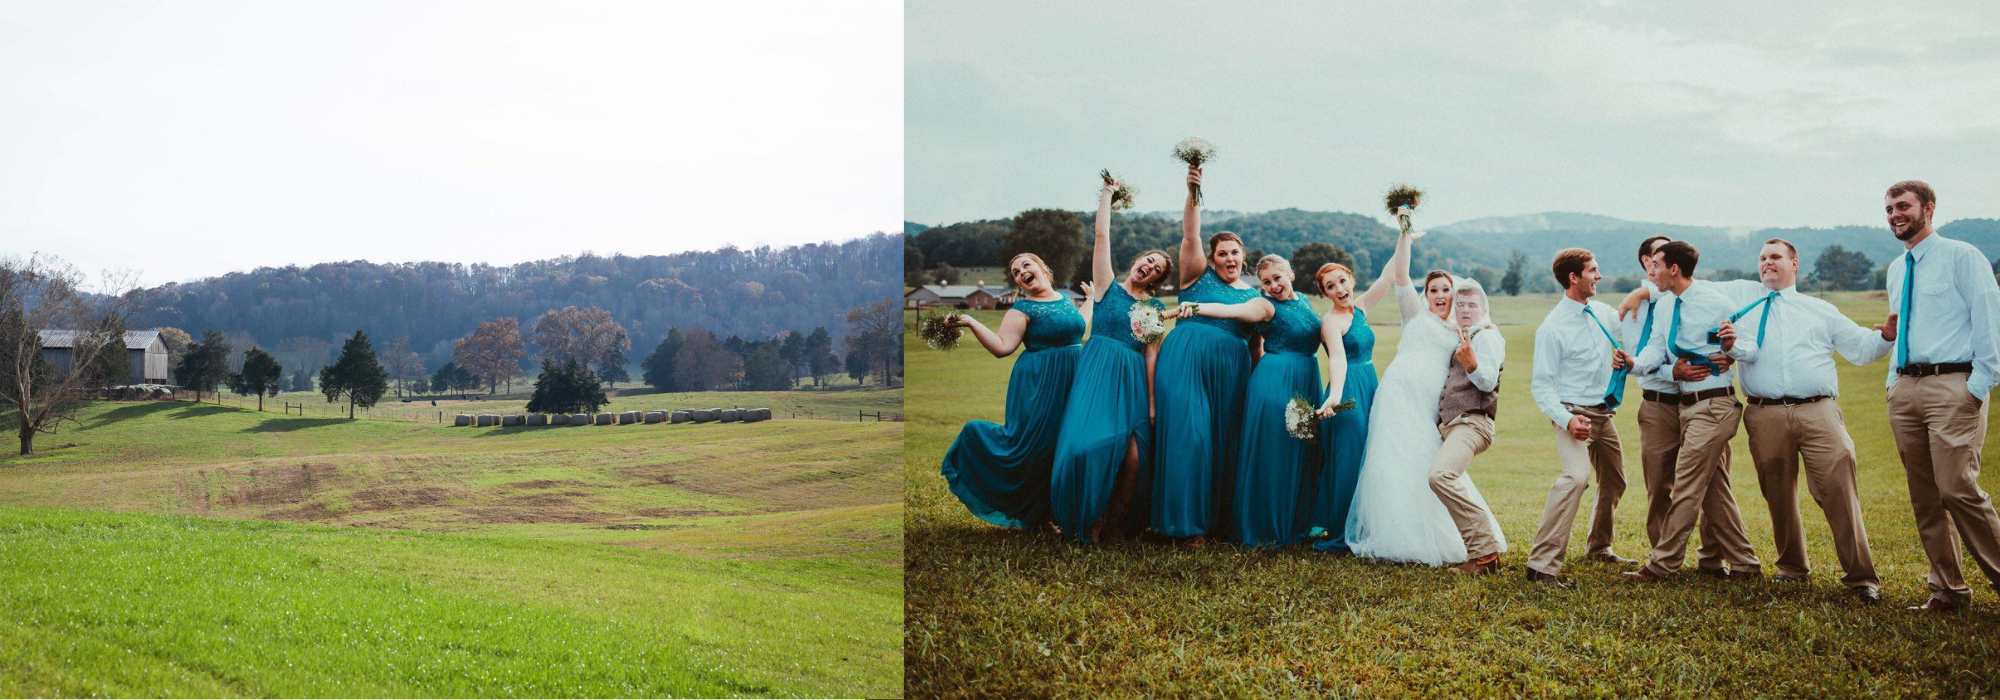 collage of landscape around bilbrey farms and silly bridal party photo